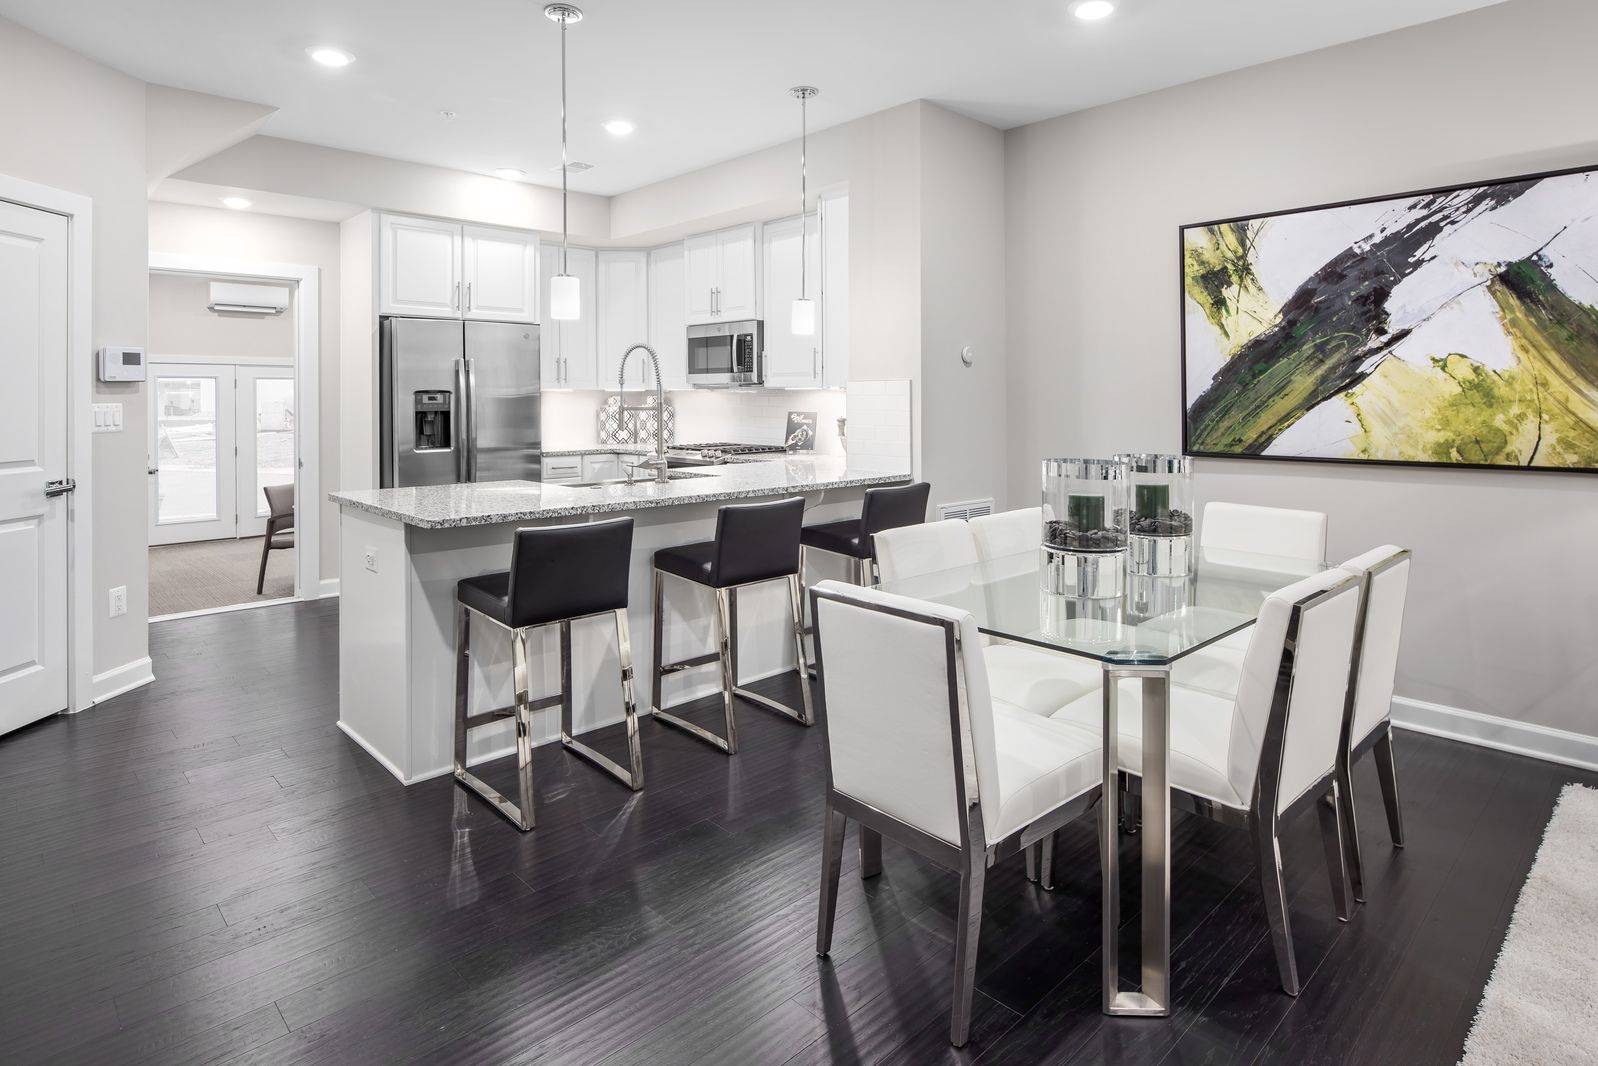 DON'T MISS YOUR OPPORTUNITY TO OWN AT PADDOCK POINTE TOWNHOME CONDOS!:Paddock Pointe hastwo remaining opportunities for you to own a brand new Addison townhome condo with a 1-car garage!Schedule your 1-on-1 Appointment today!